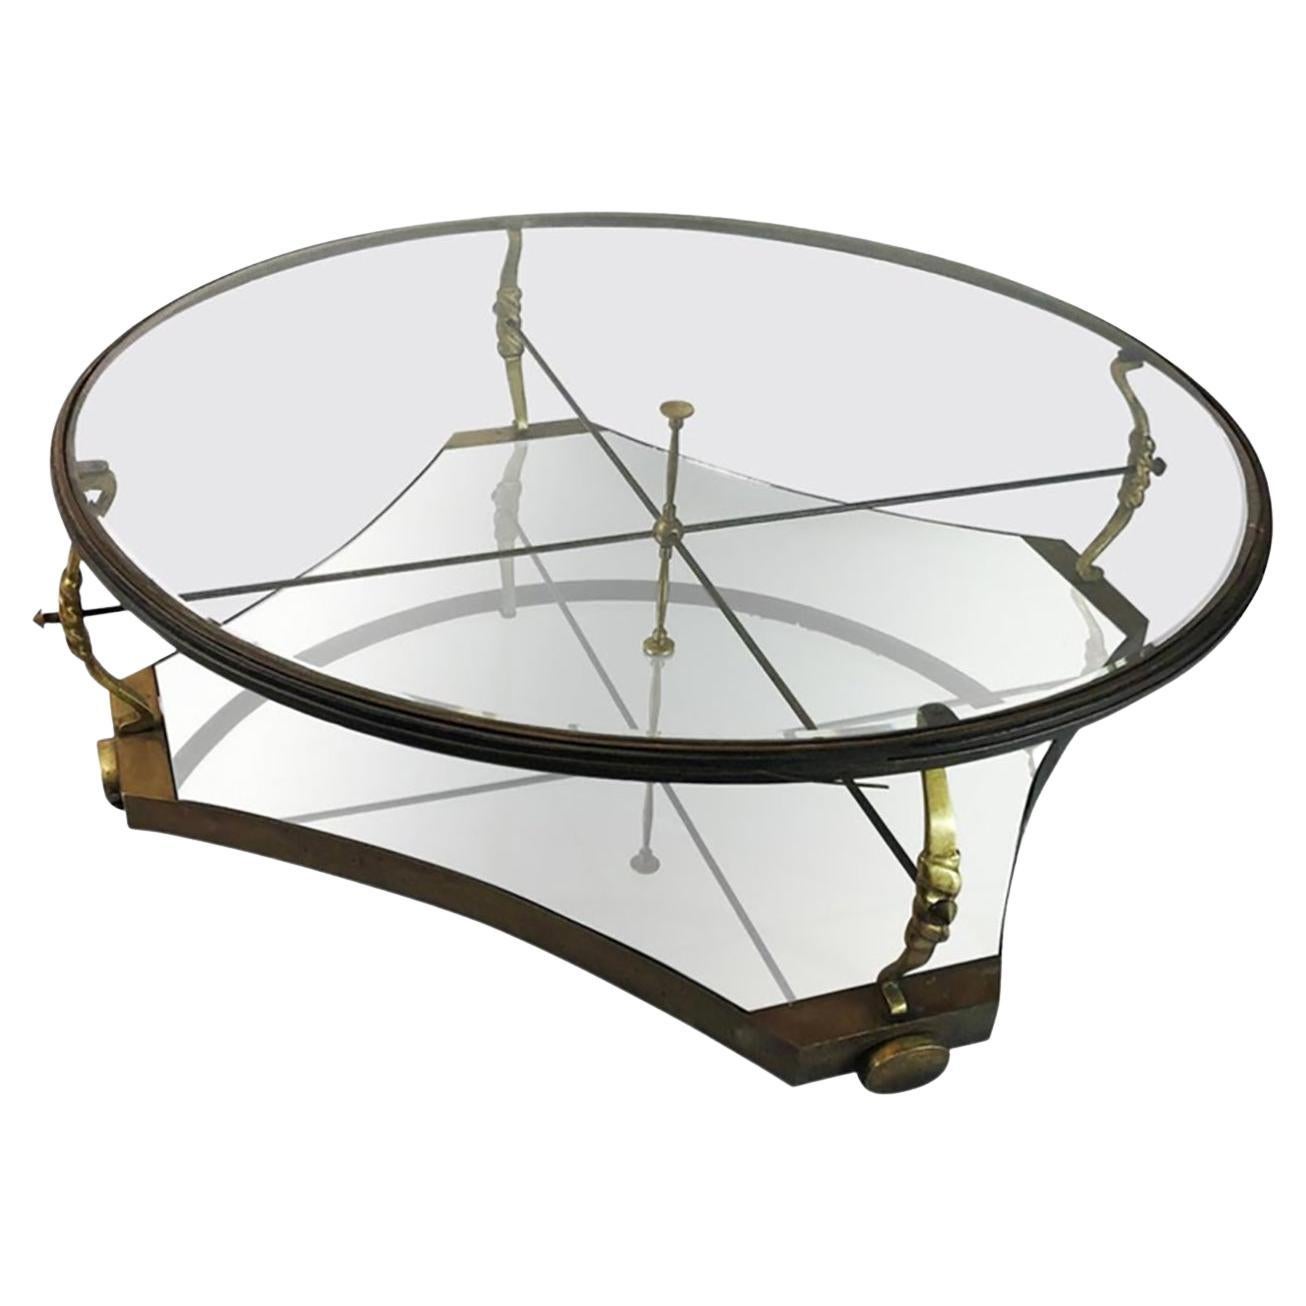 Mexican Modernist Cocktail Table by Arturo Pani